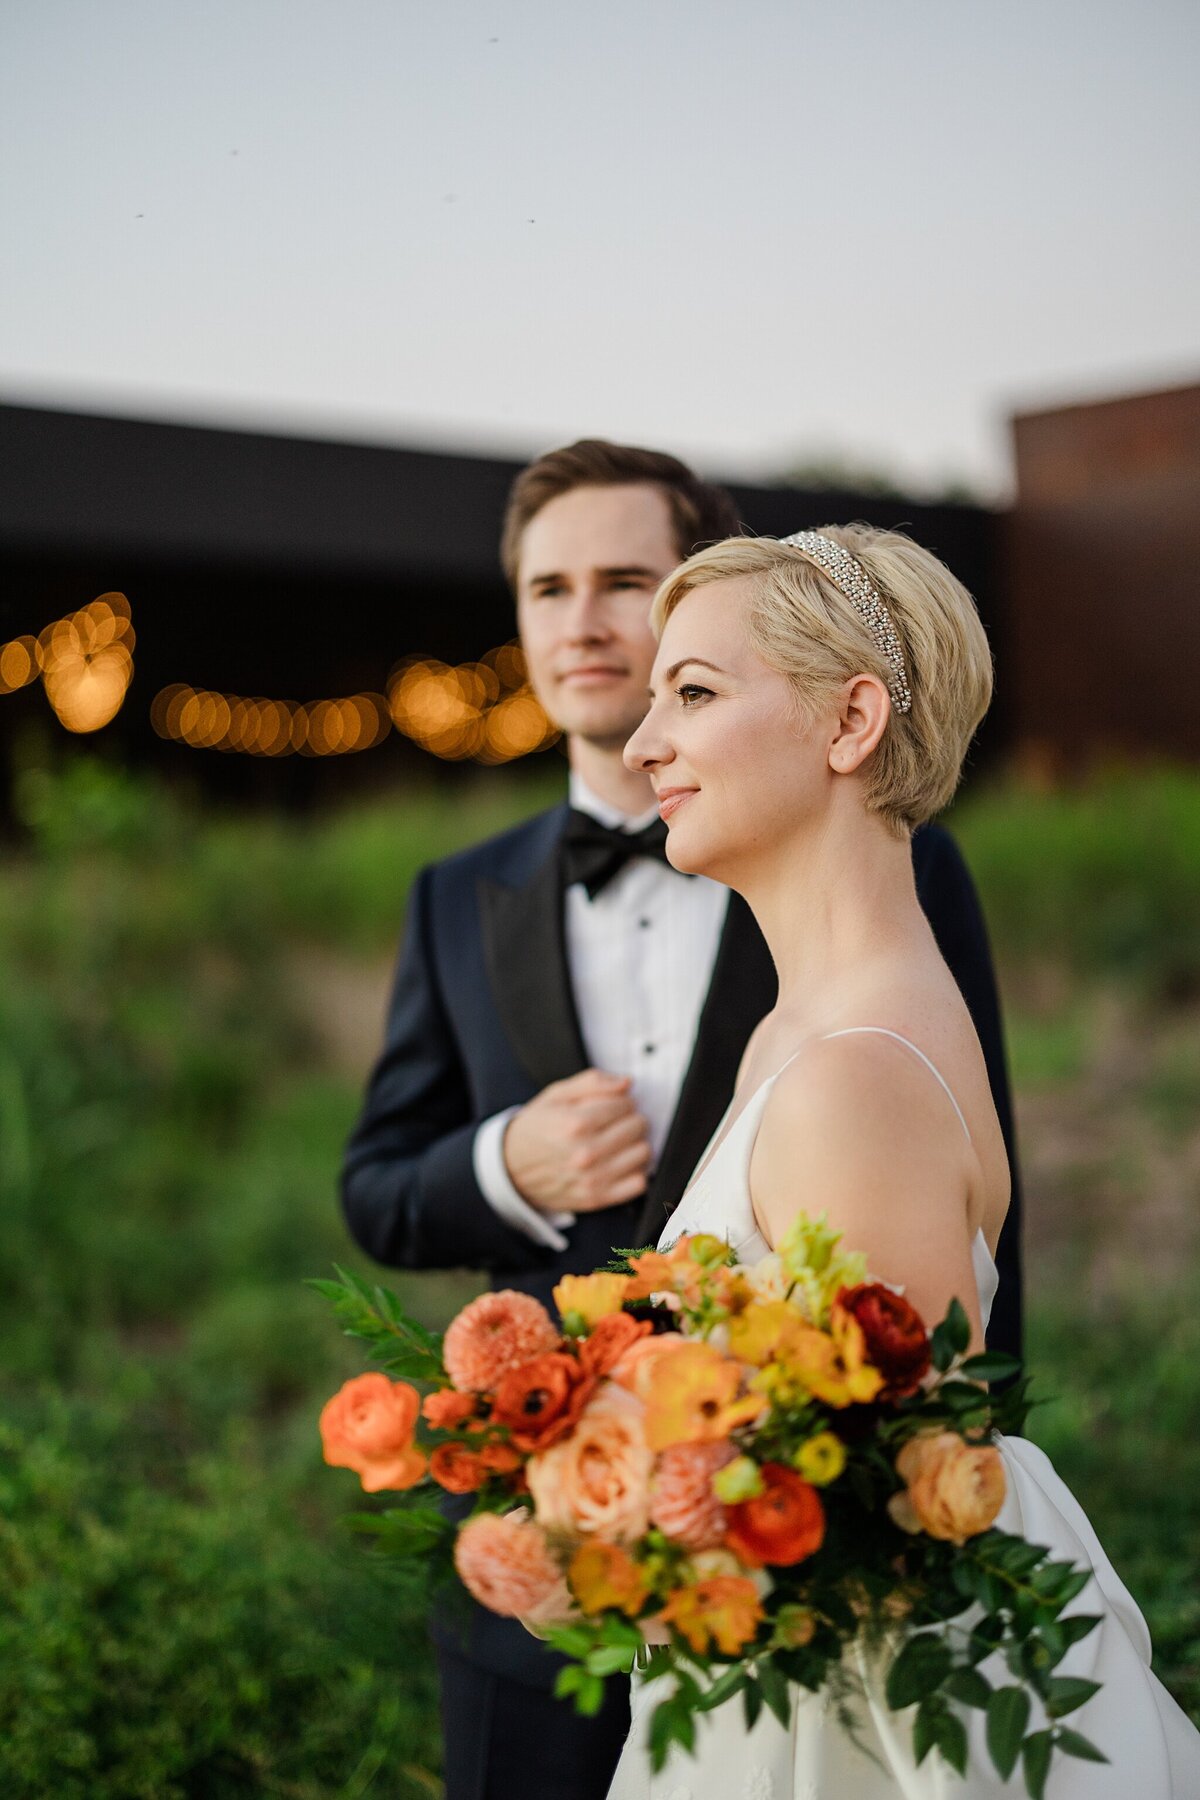 Portrait of a bride and groom looking off into the distance on their wedding day in Dallas, Texas. The bride stands in the foreground and is wearing a sleeveless, long, white dress and is holding a bouquet of orange flowers. The groom stands behind her and is wearing a black tuxedo with a bowtie.